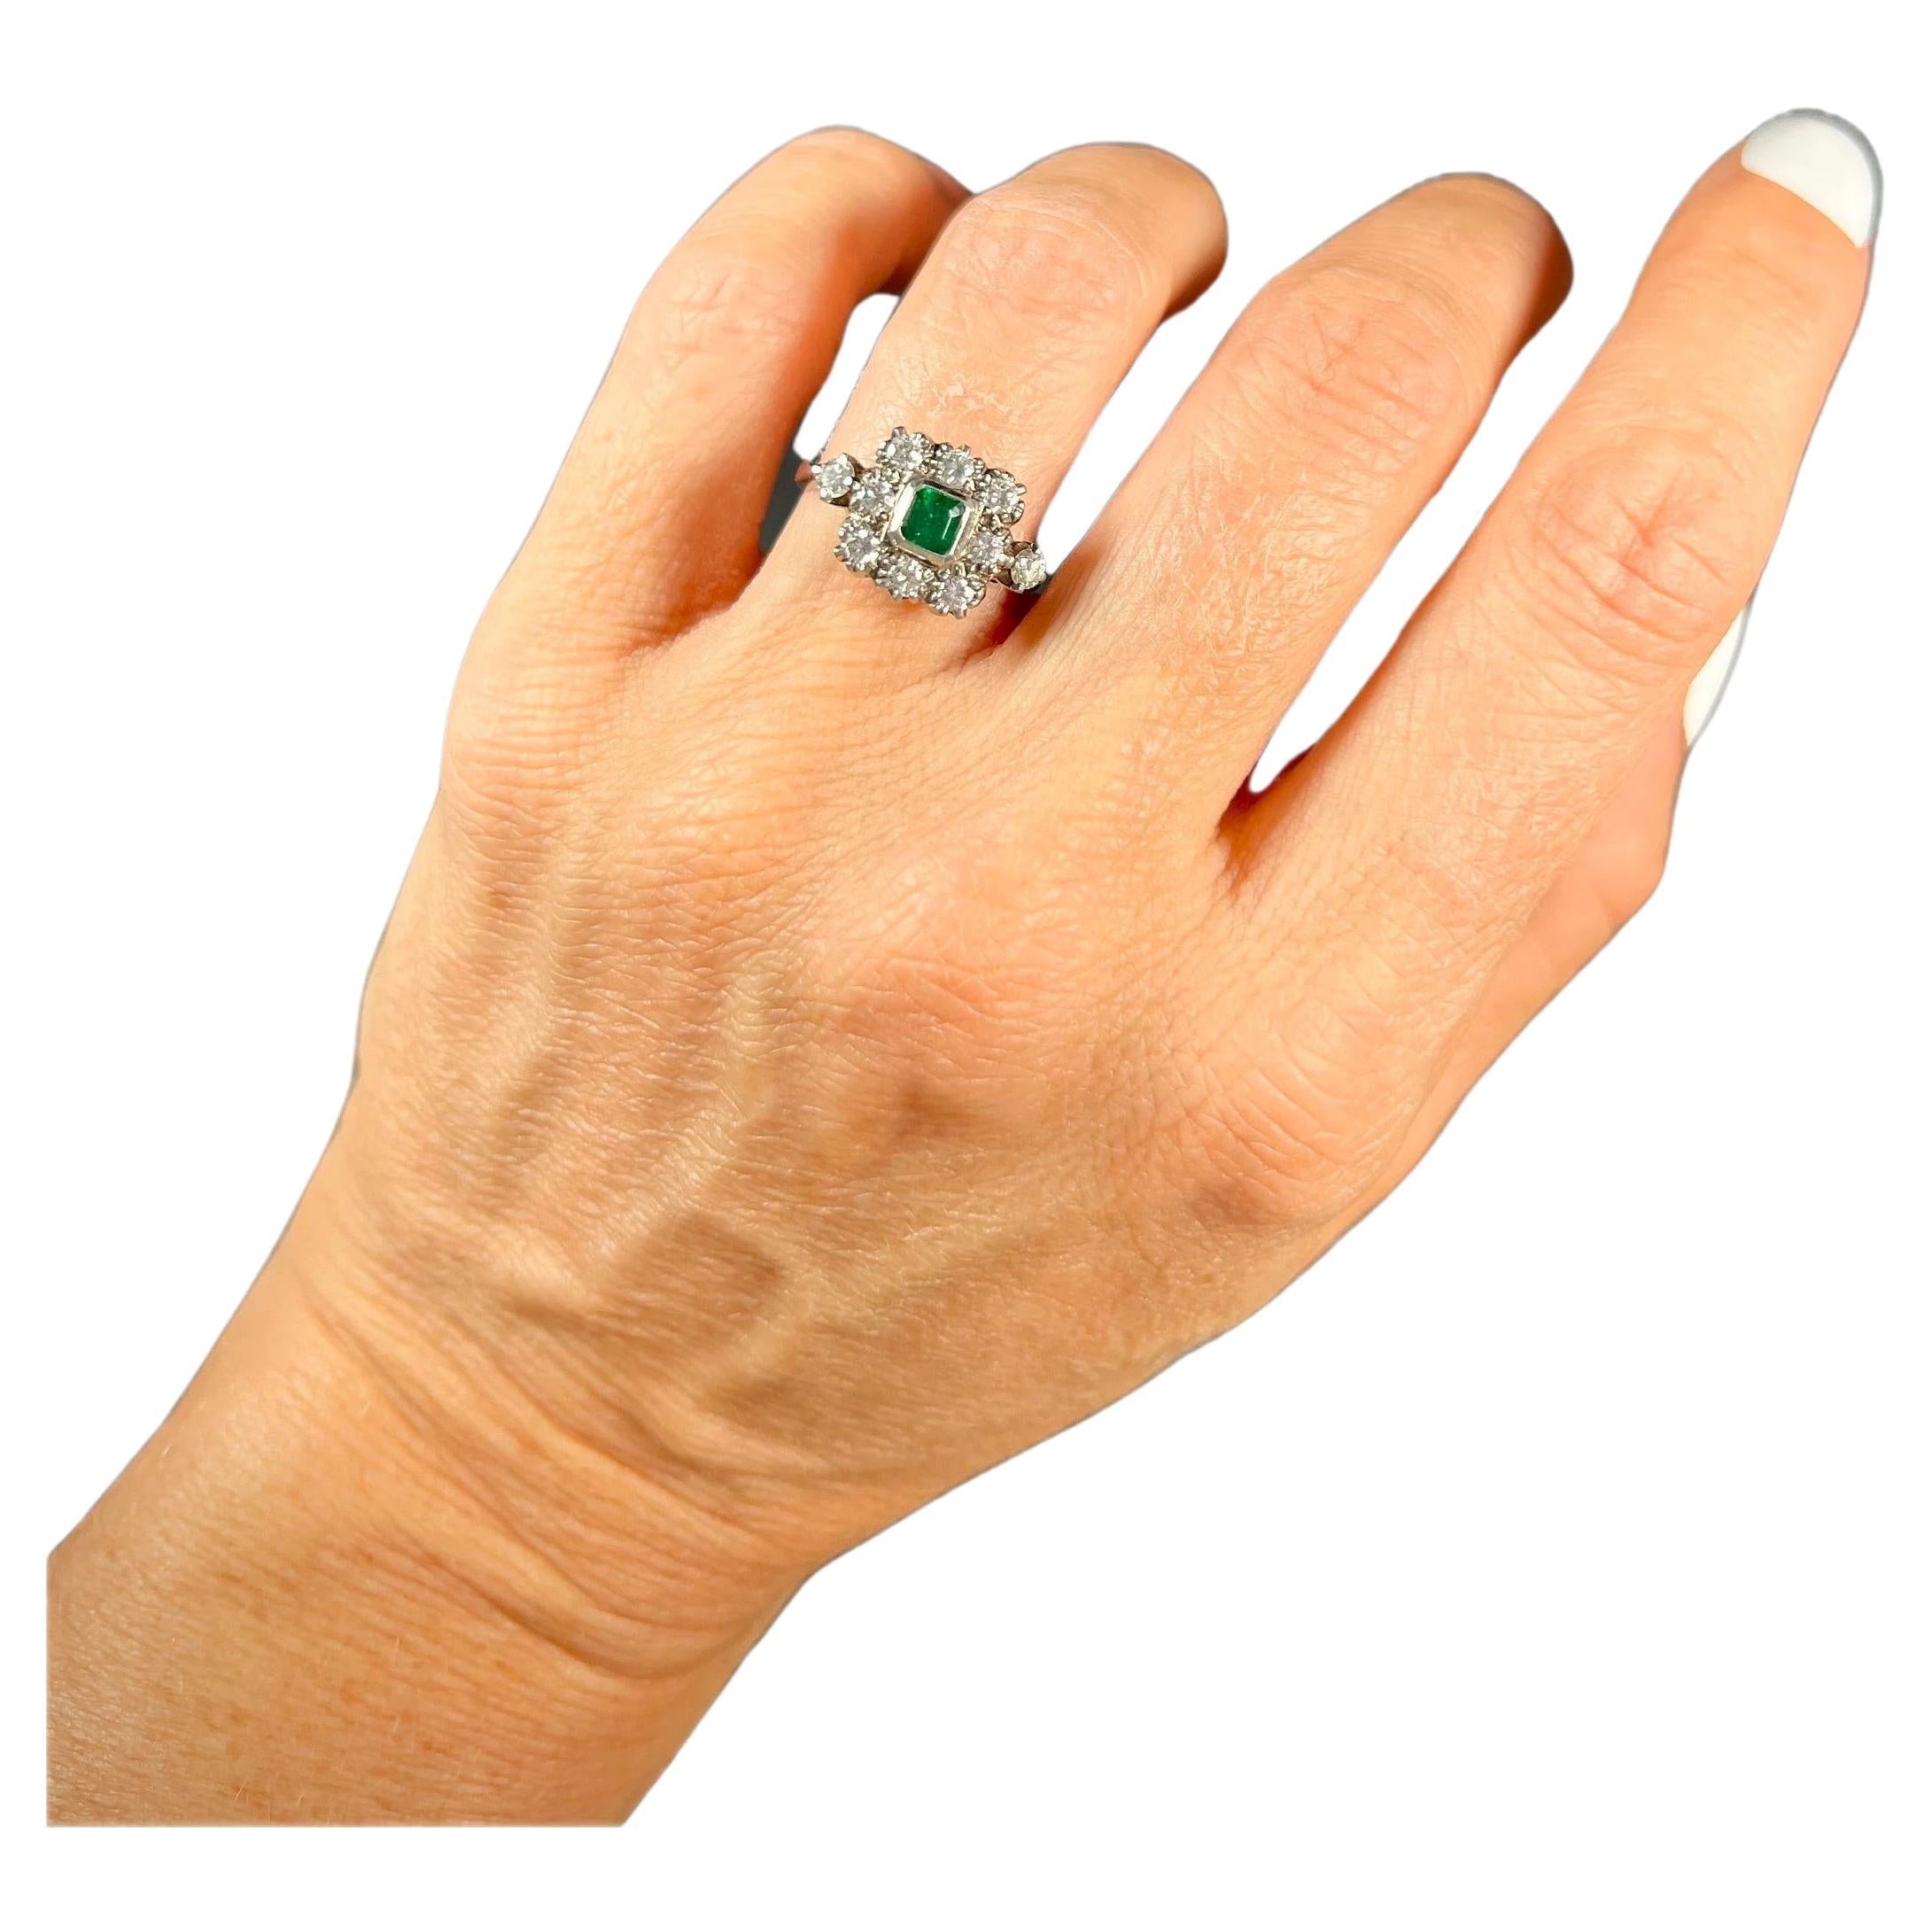 Vintage 18ct White Gold, 1940’s Emerald Diamond Square Cluster Ring